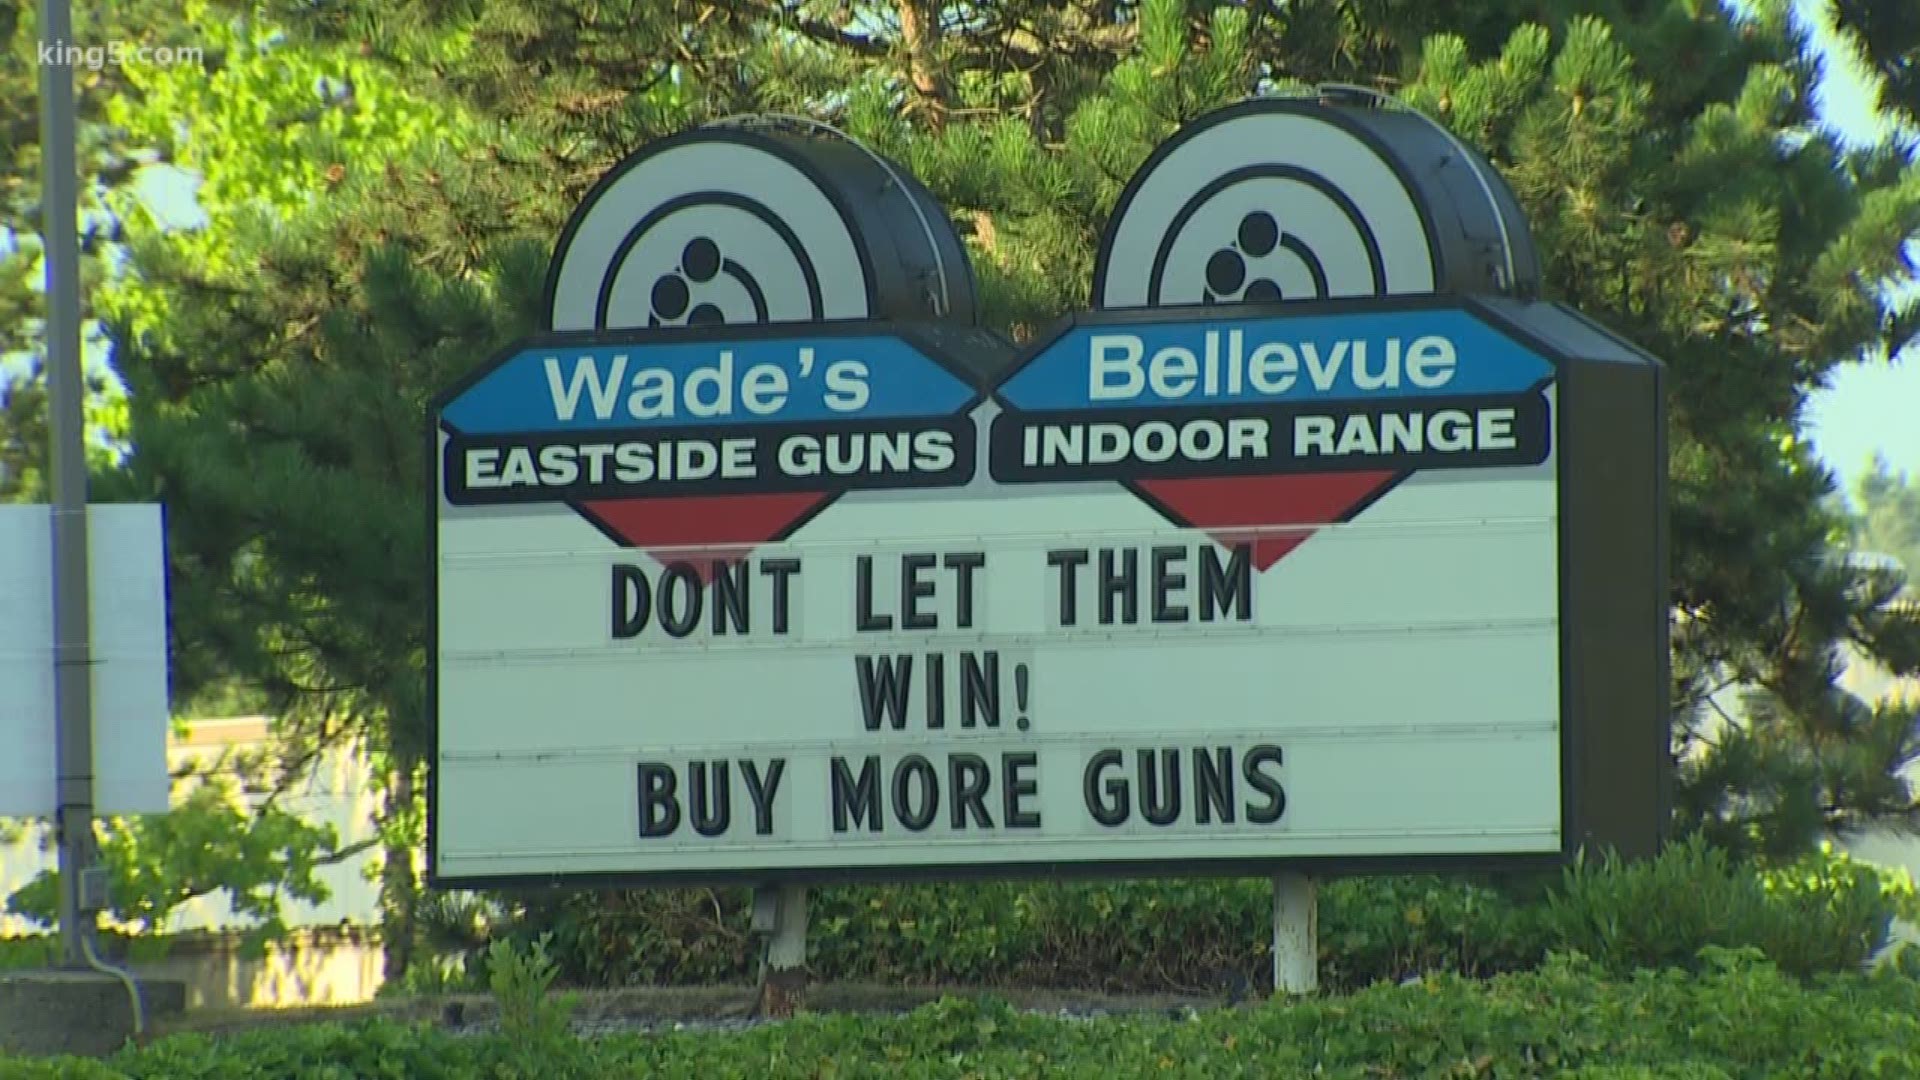 A gun shop owner is backing up his sign, saying it's in response to Washington's new gun laws, not the recent mass shootings.